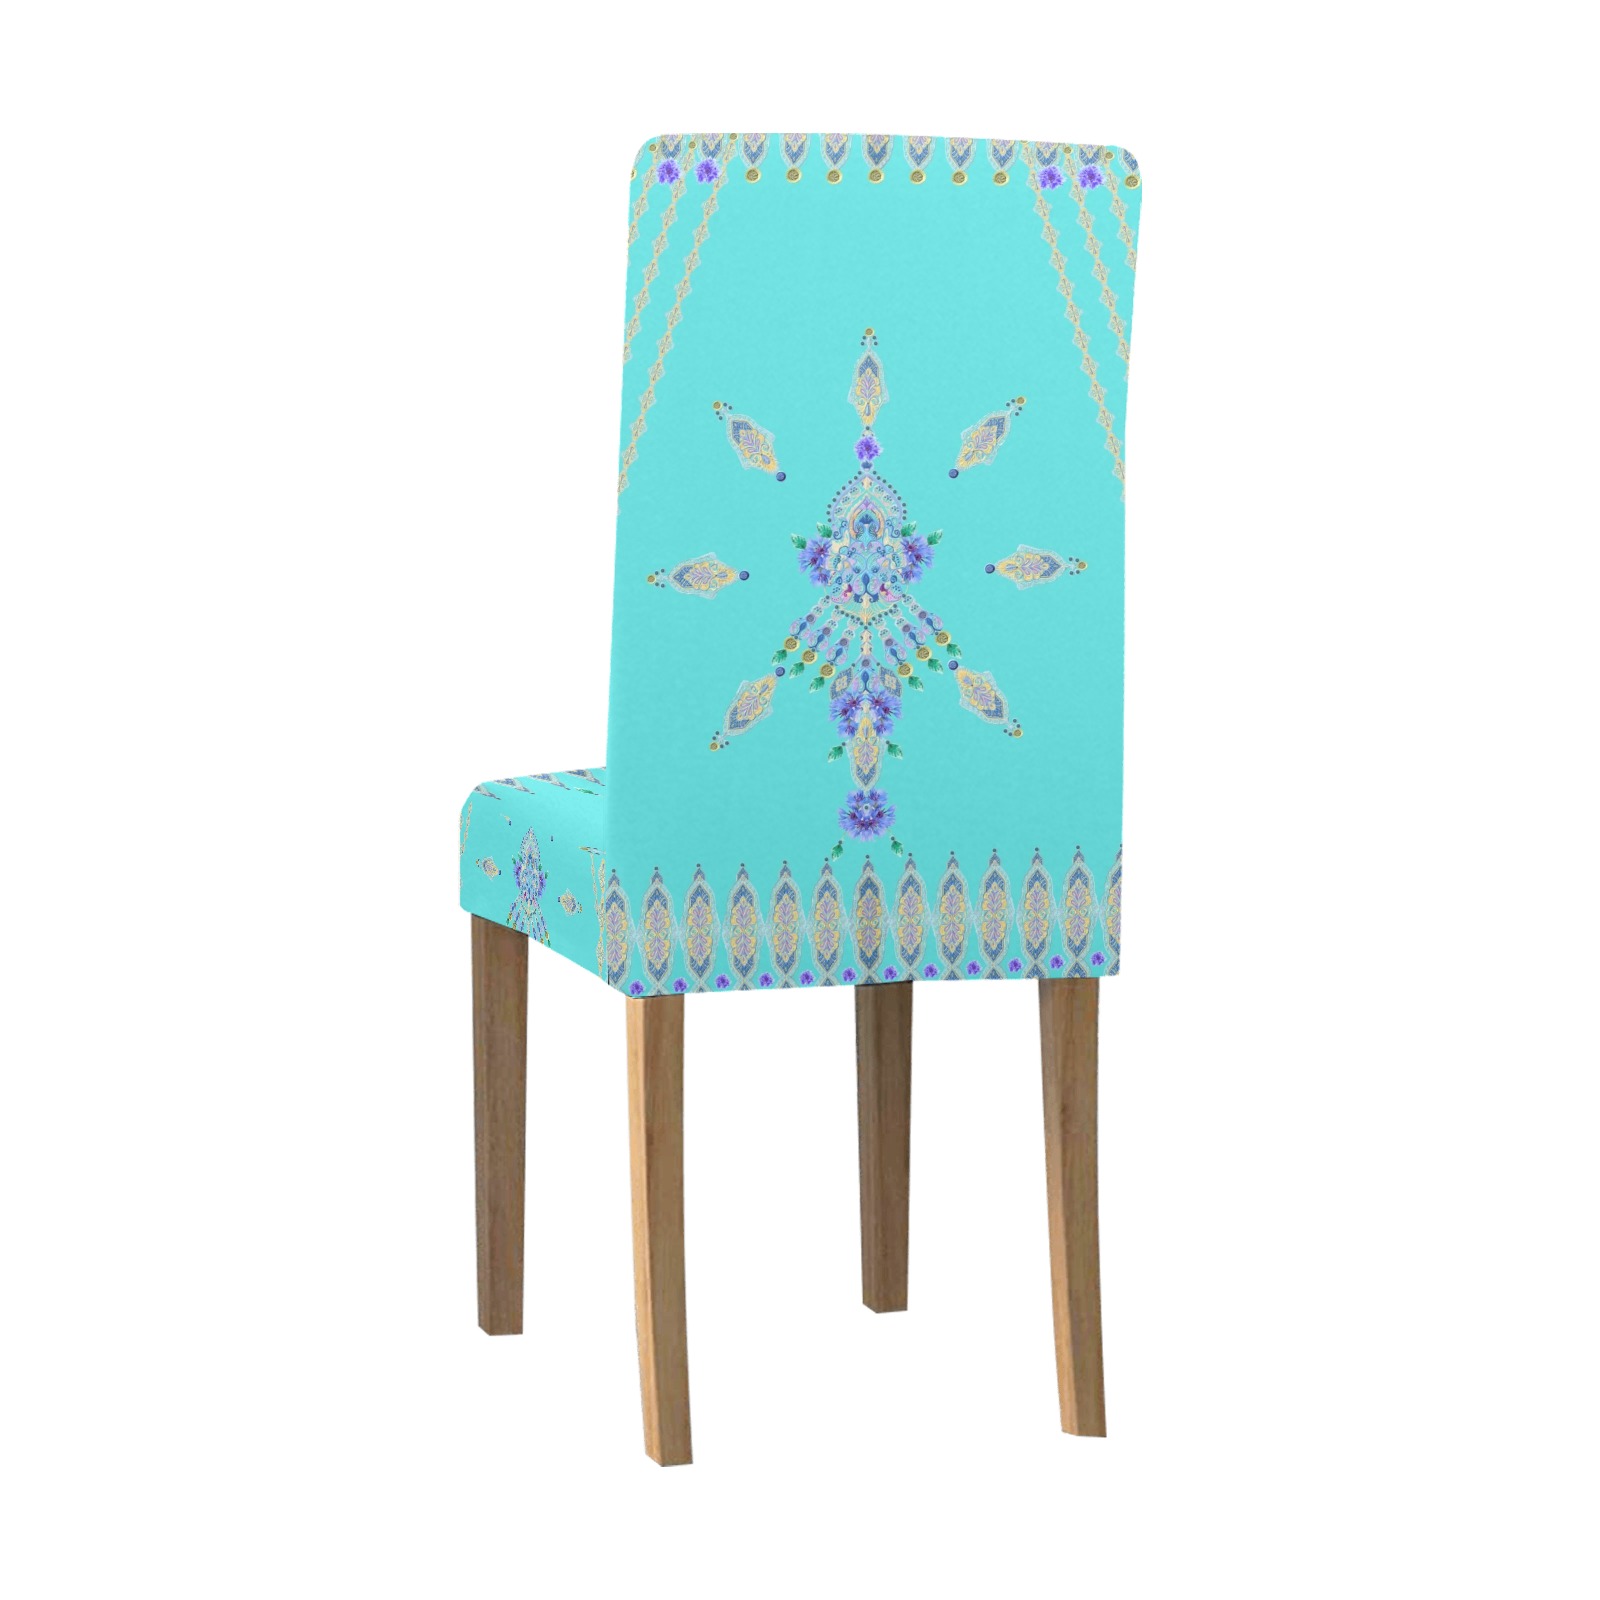 bleuetbleu coffee time Removable Dining Chair Cover